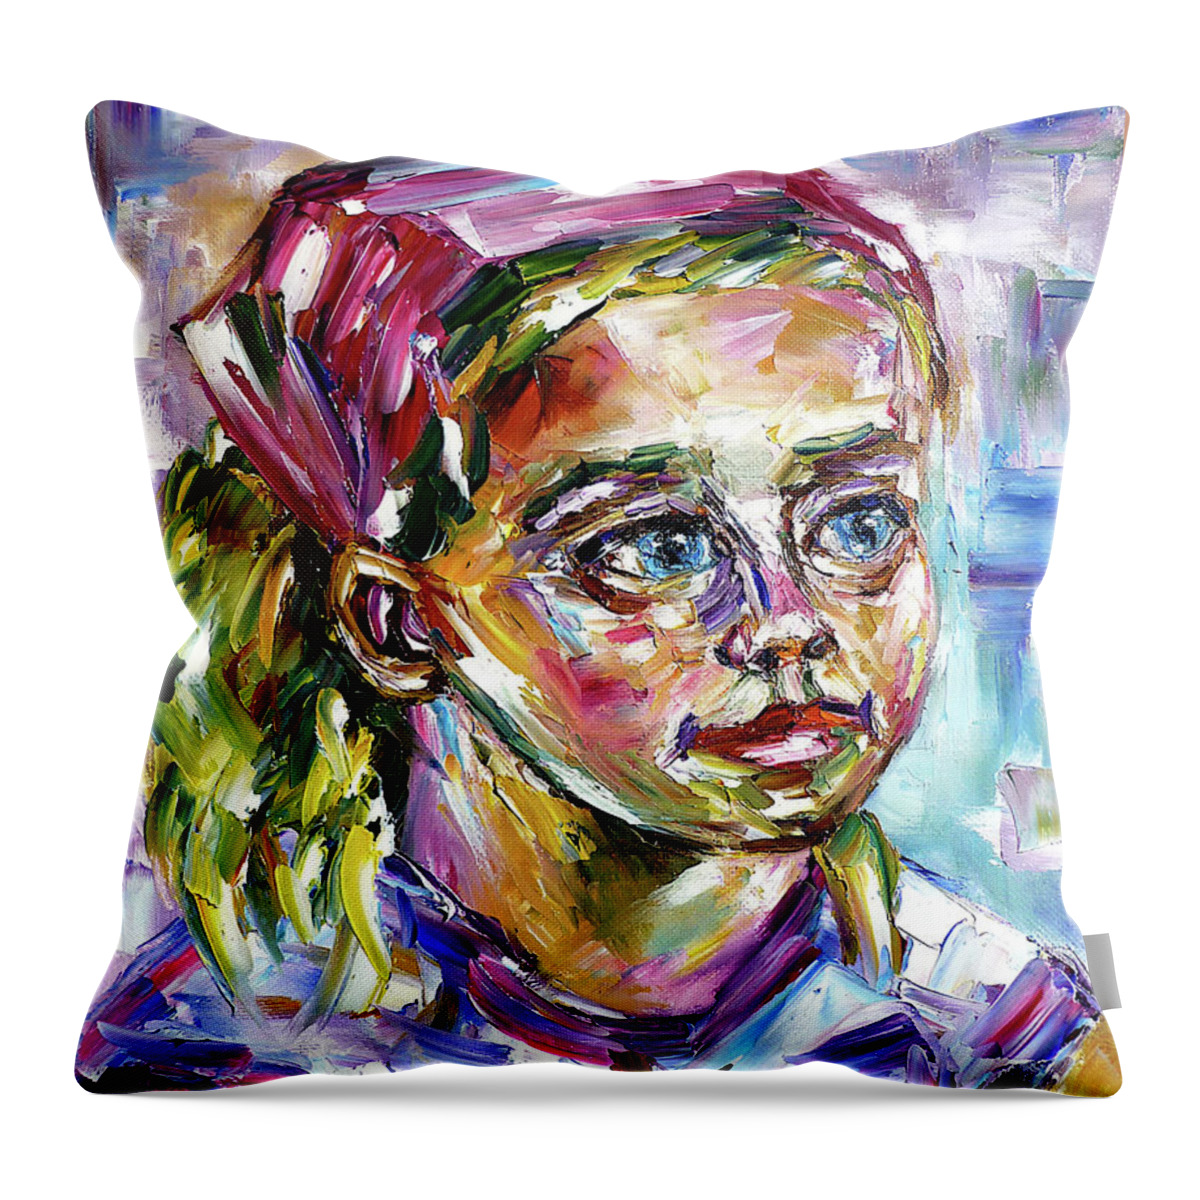 Child From Holland Throw Pillow featuring the painting Girl With A Pink Hair Band by Mirek Kuzniar